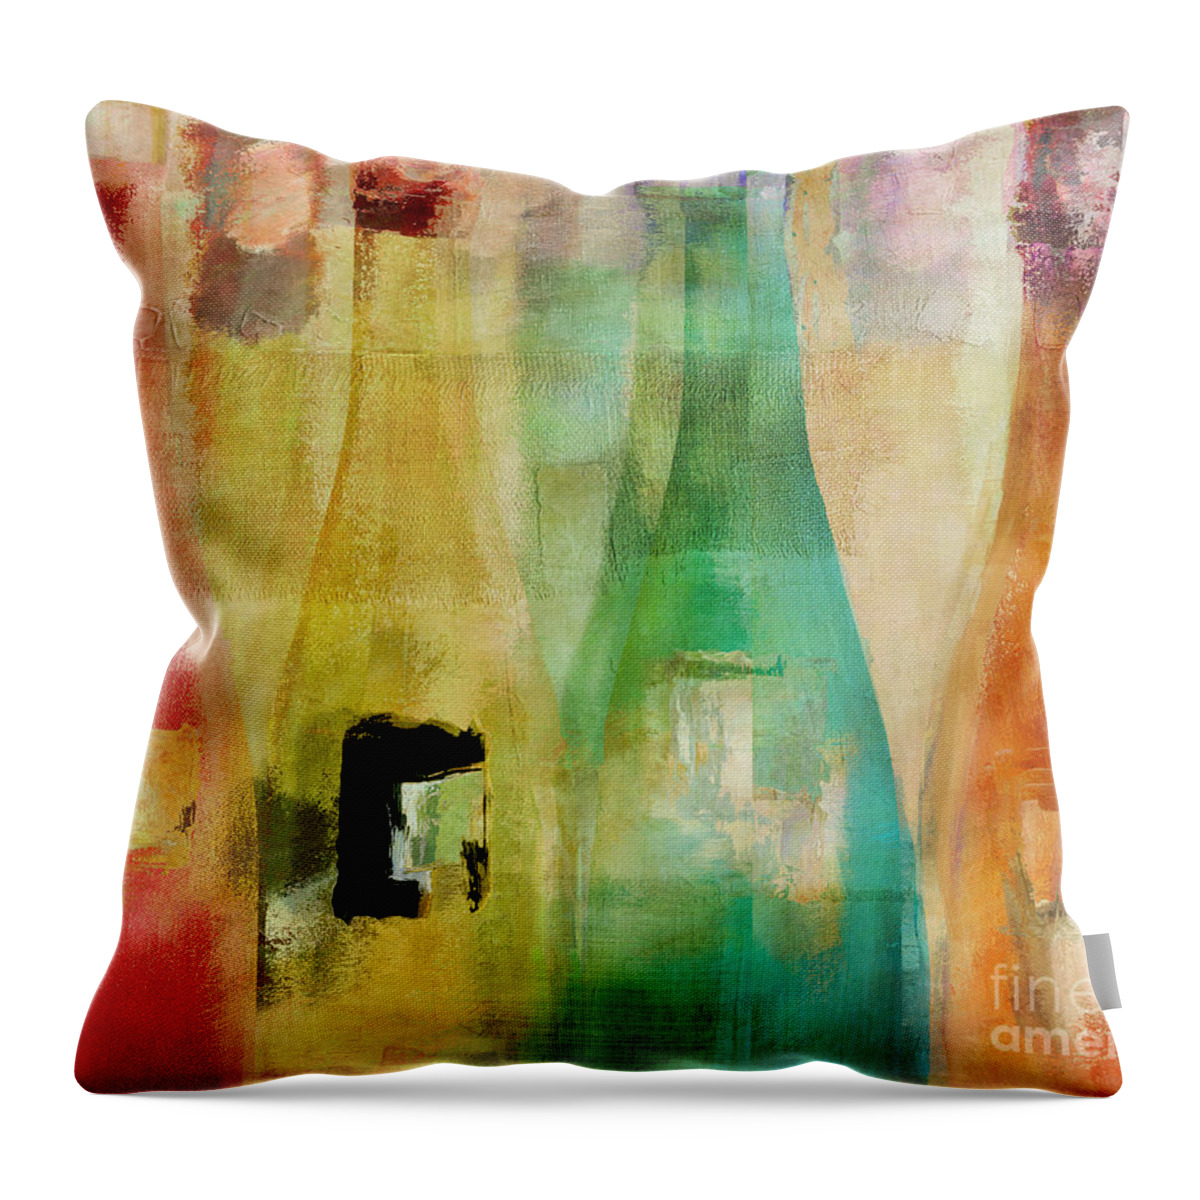 Painted Bottles Throw Pillow featuring the painting Bouteilles by Mindy Sommers